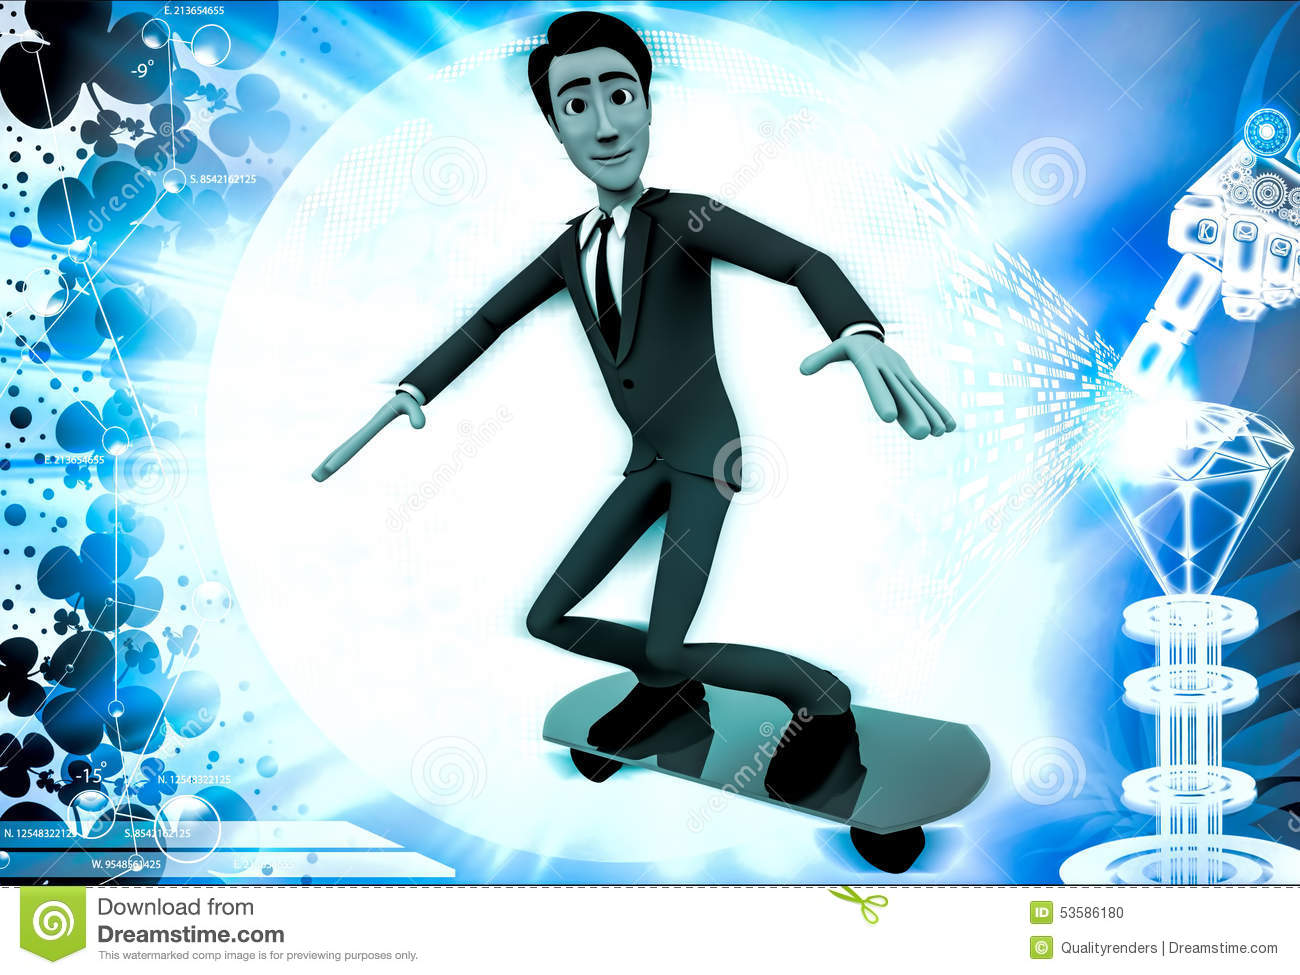 3d Man Jumping With Red Skateboard Illustration On Abstract Background